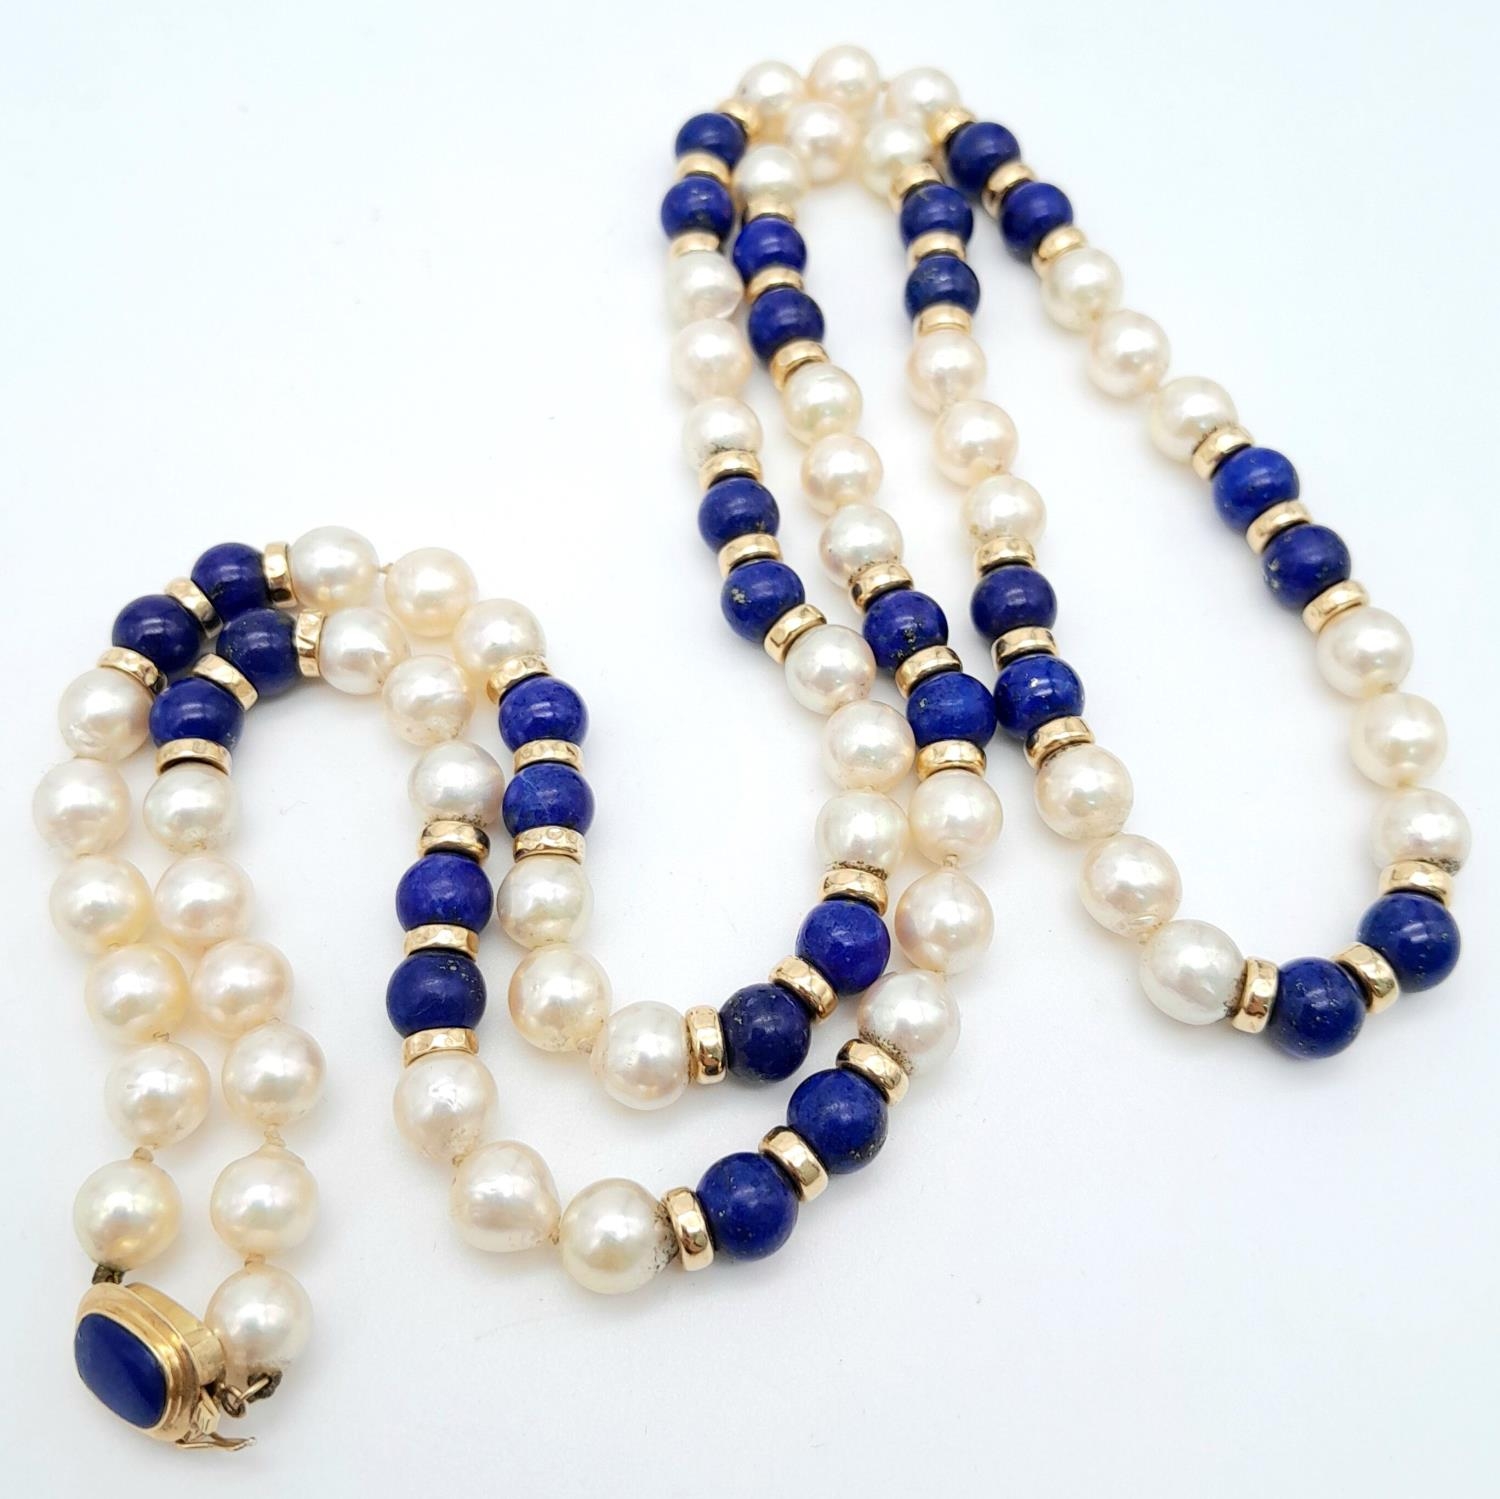 A Lapis and Pearl Necklace with 14K Gold Spacers and Clasp. 68cm - Image 3 of 6